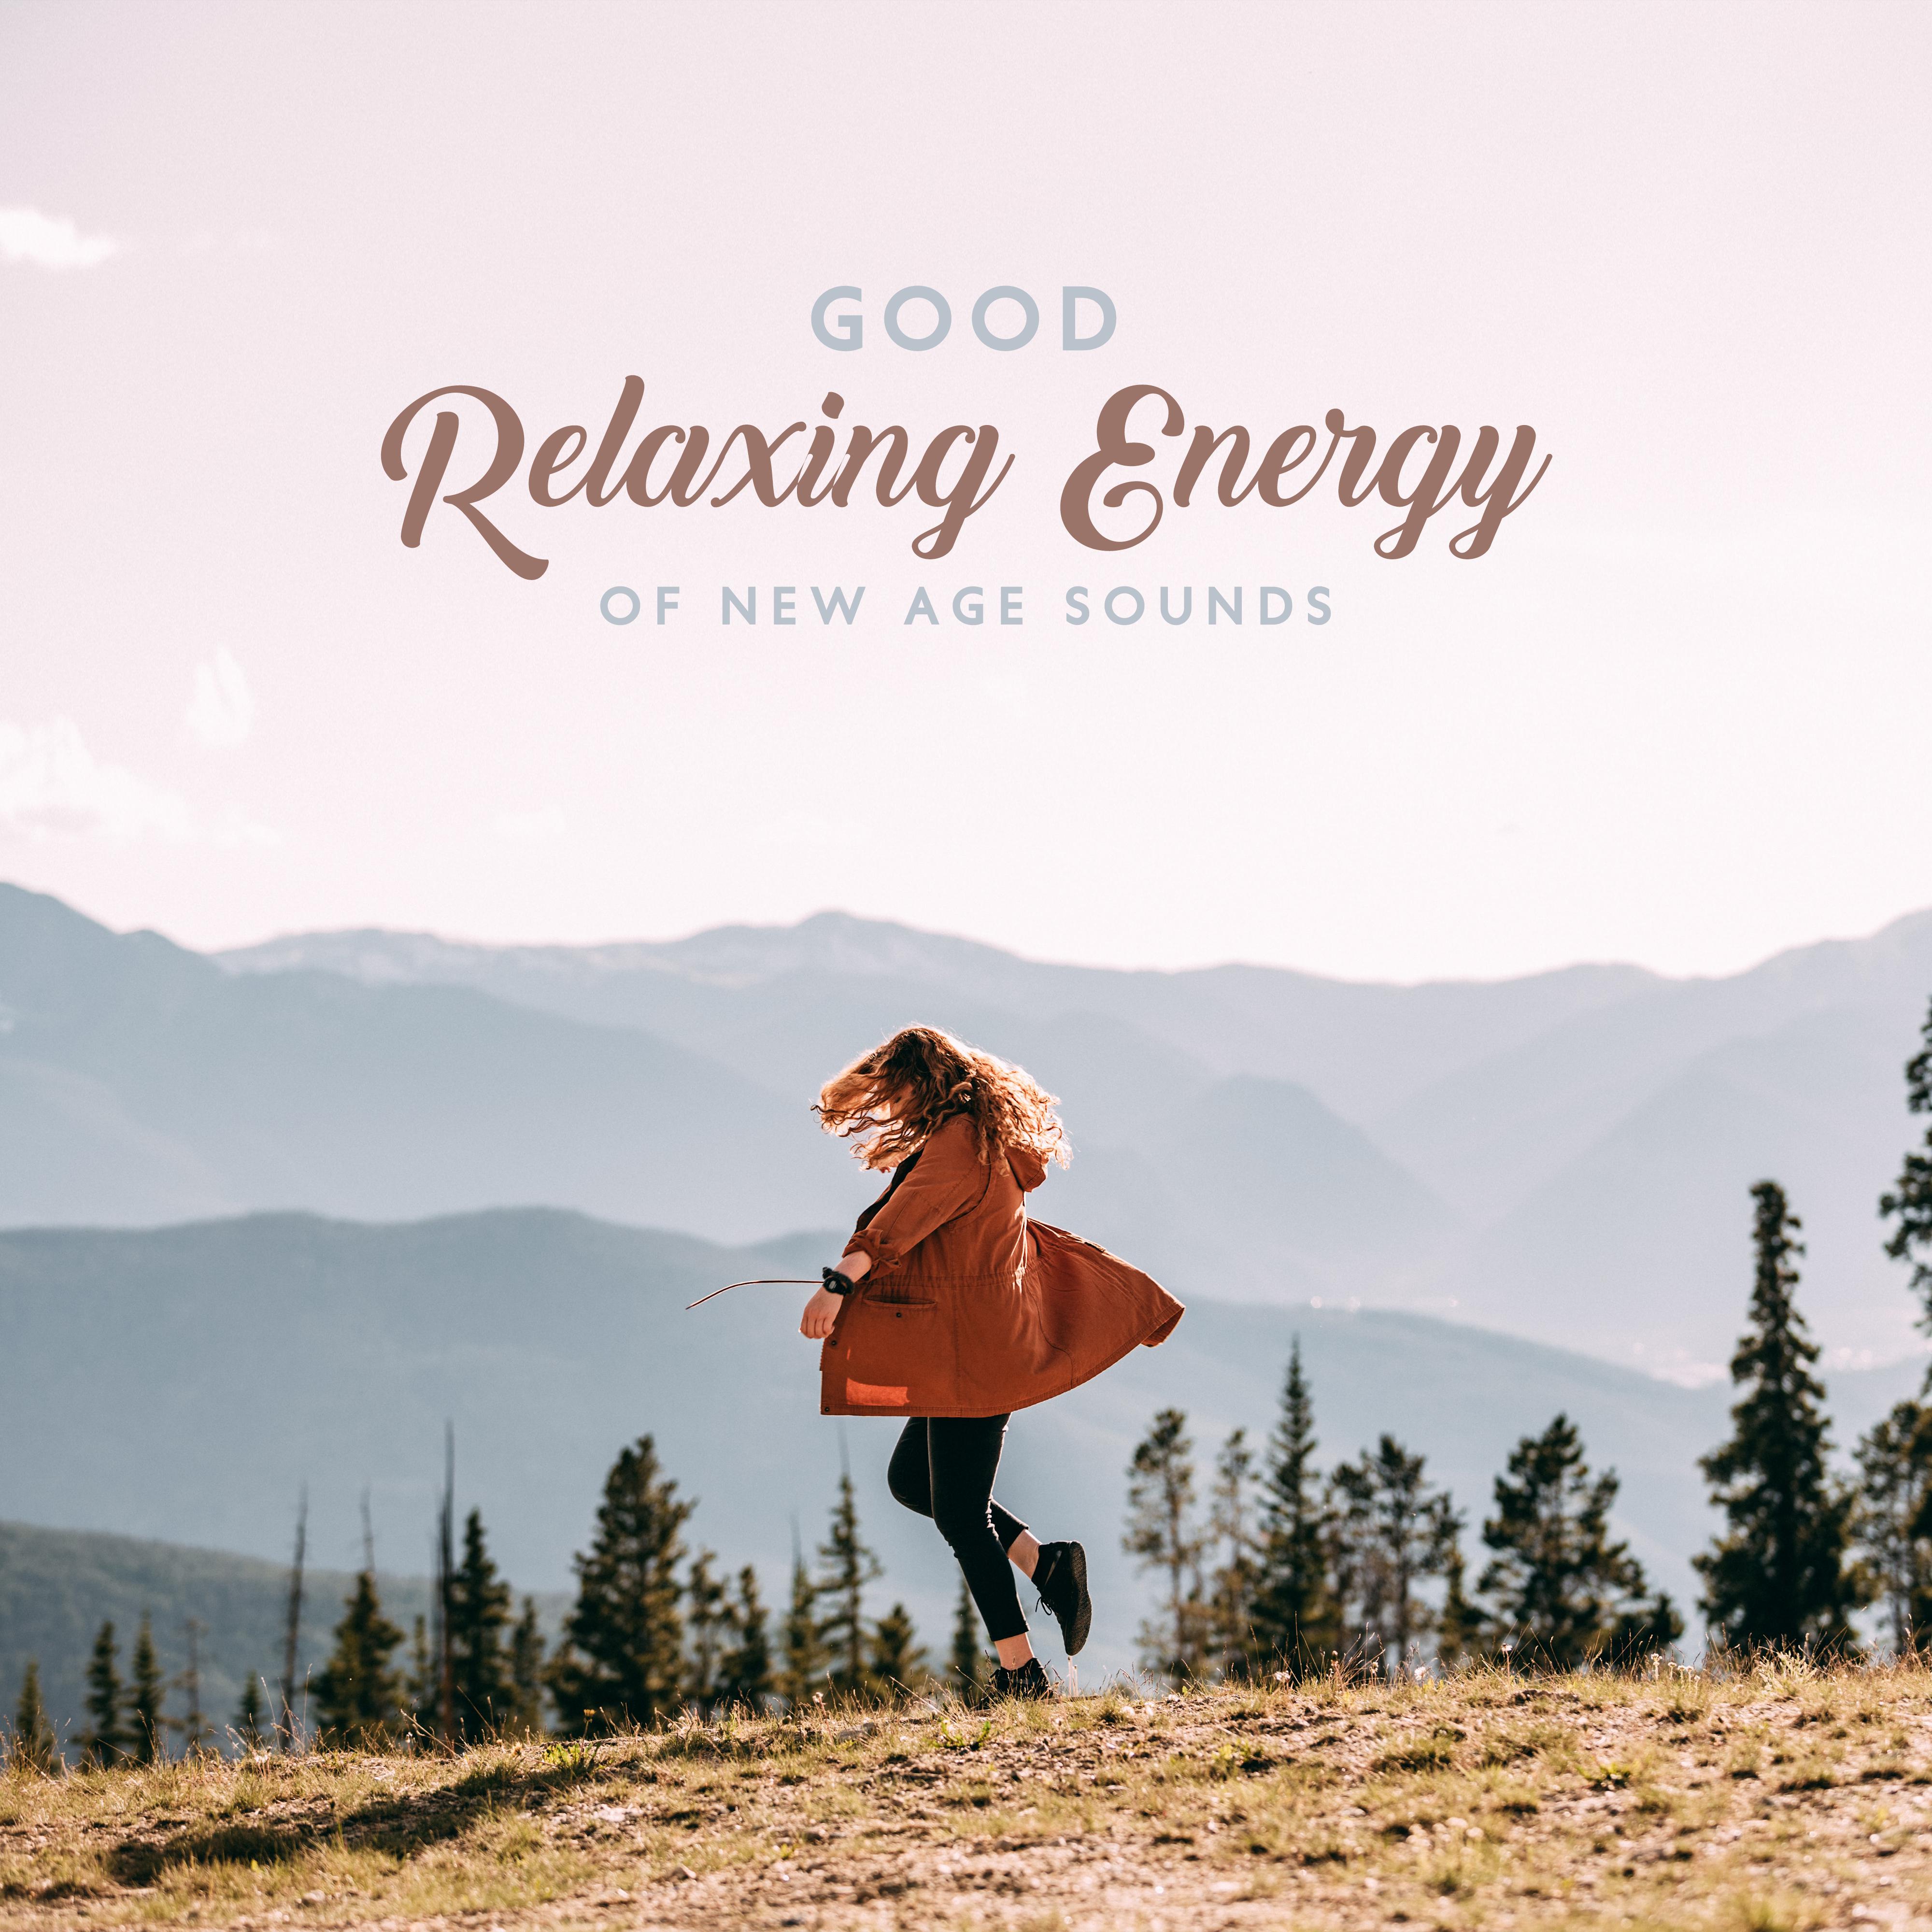 Good Relaxing Energy of New Age Sounds – 2019 Fresh Ambient & Nature Music Selection for Best Relaxation, Calming Down, Stress Free, Afternoon Nap Rest